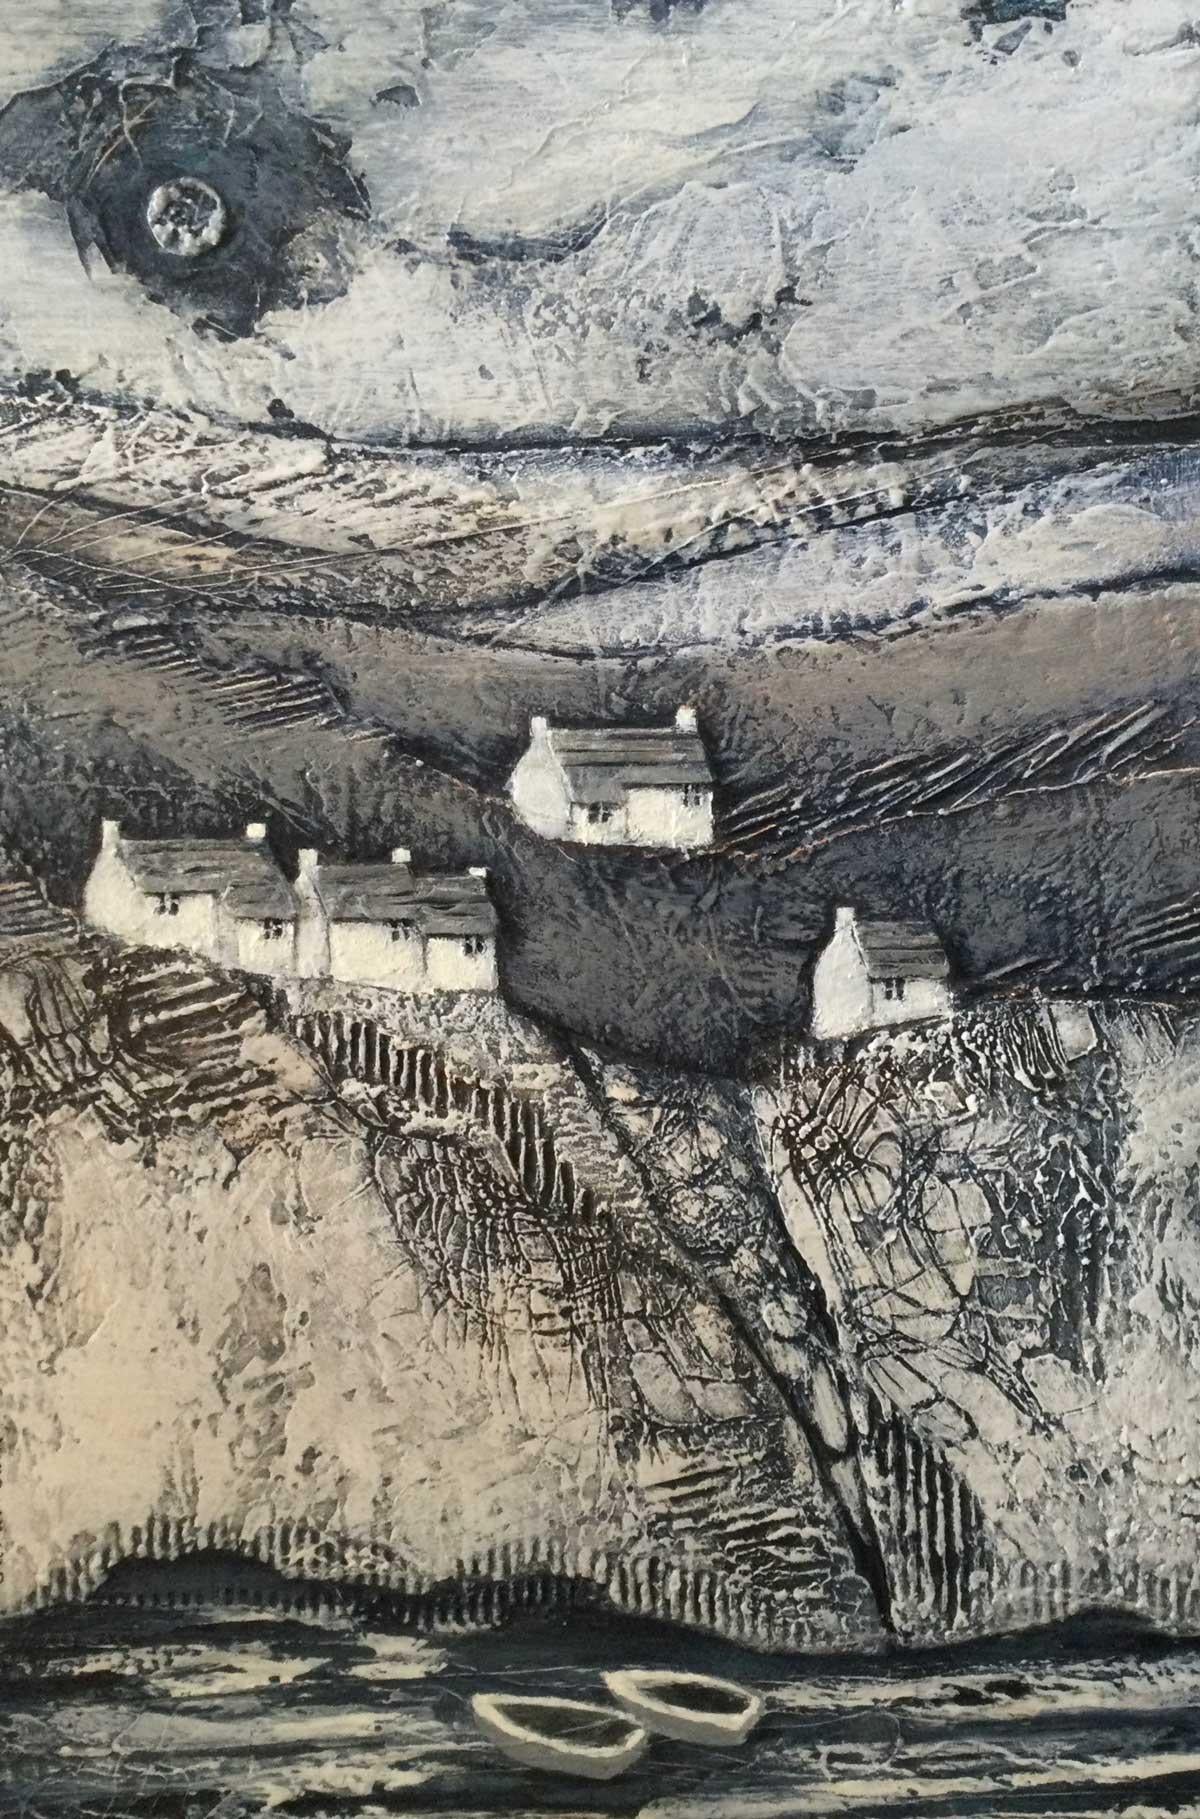 Down to the Sea - Brooding British Landscape / Framed Mixed Media